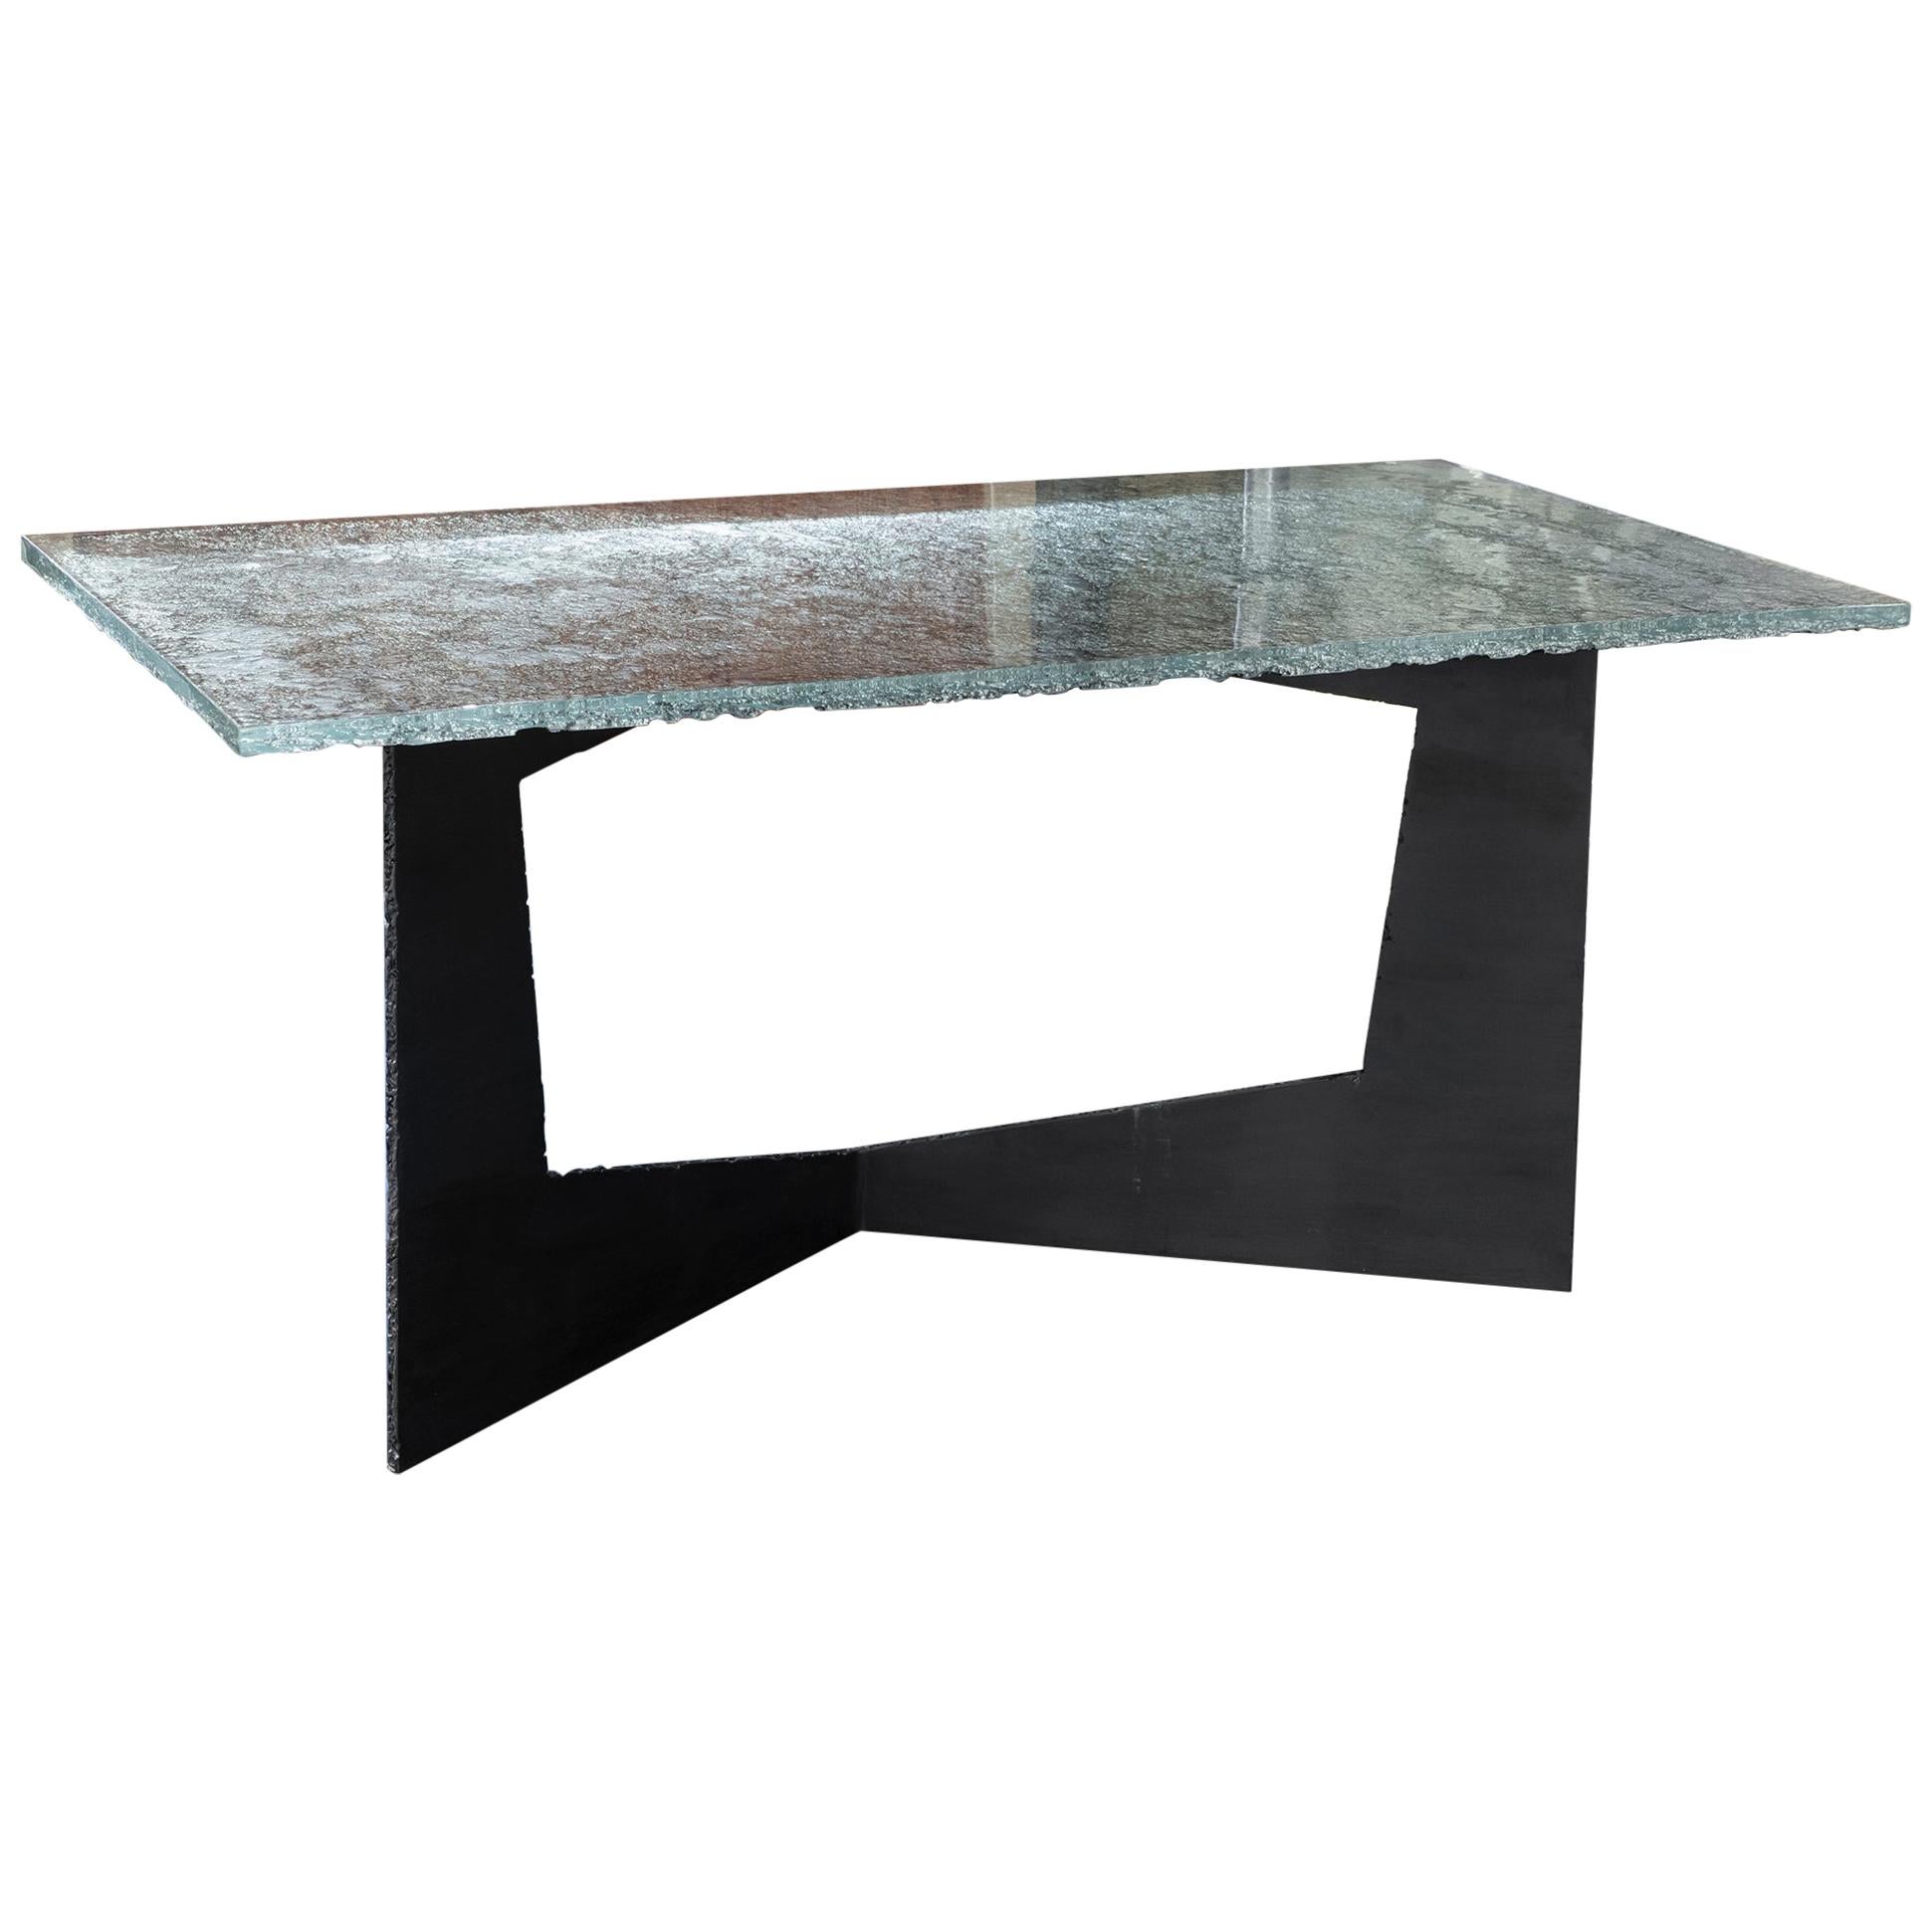 Flair Edition Contemporary Desk, Steel Base and Art Glass Top, Italy, 2019